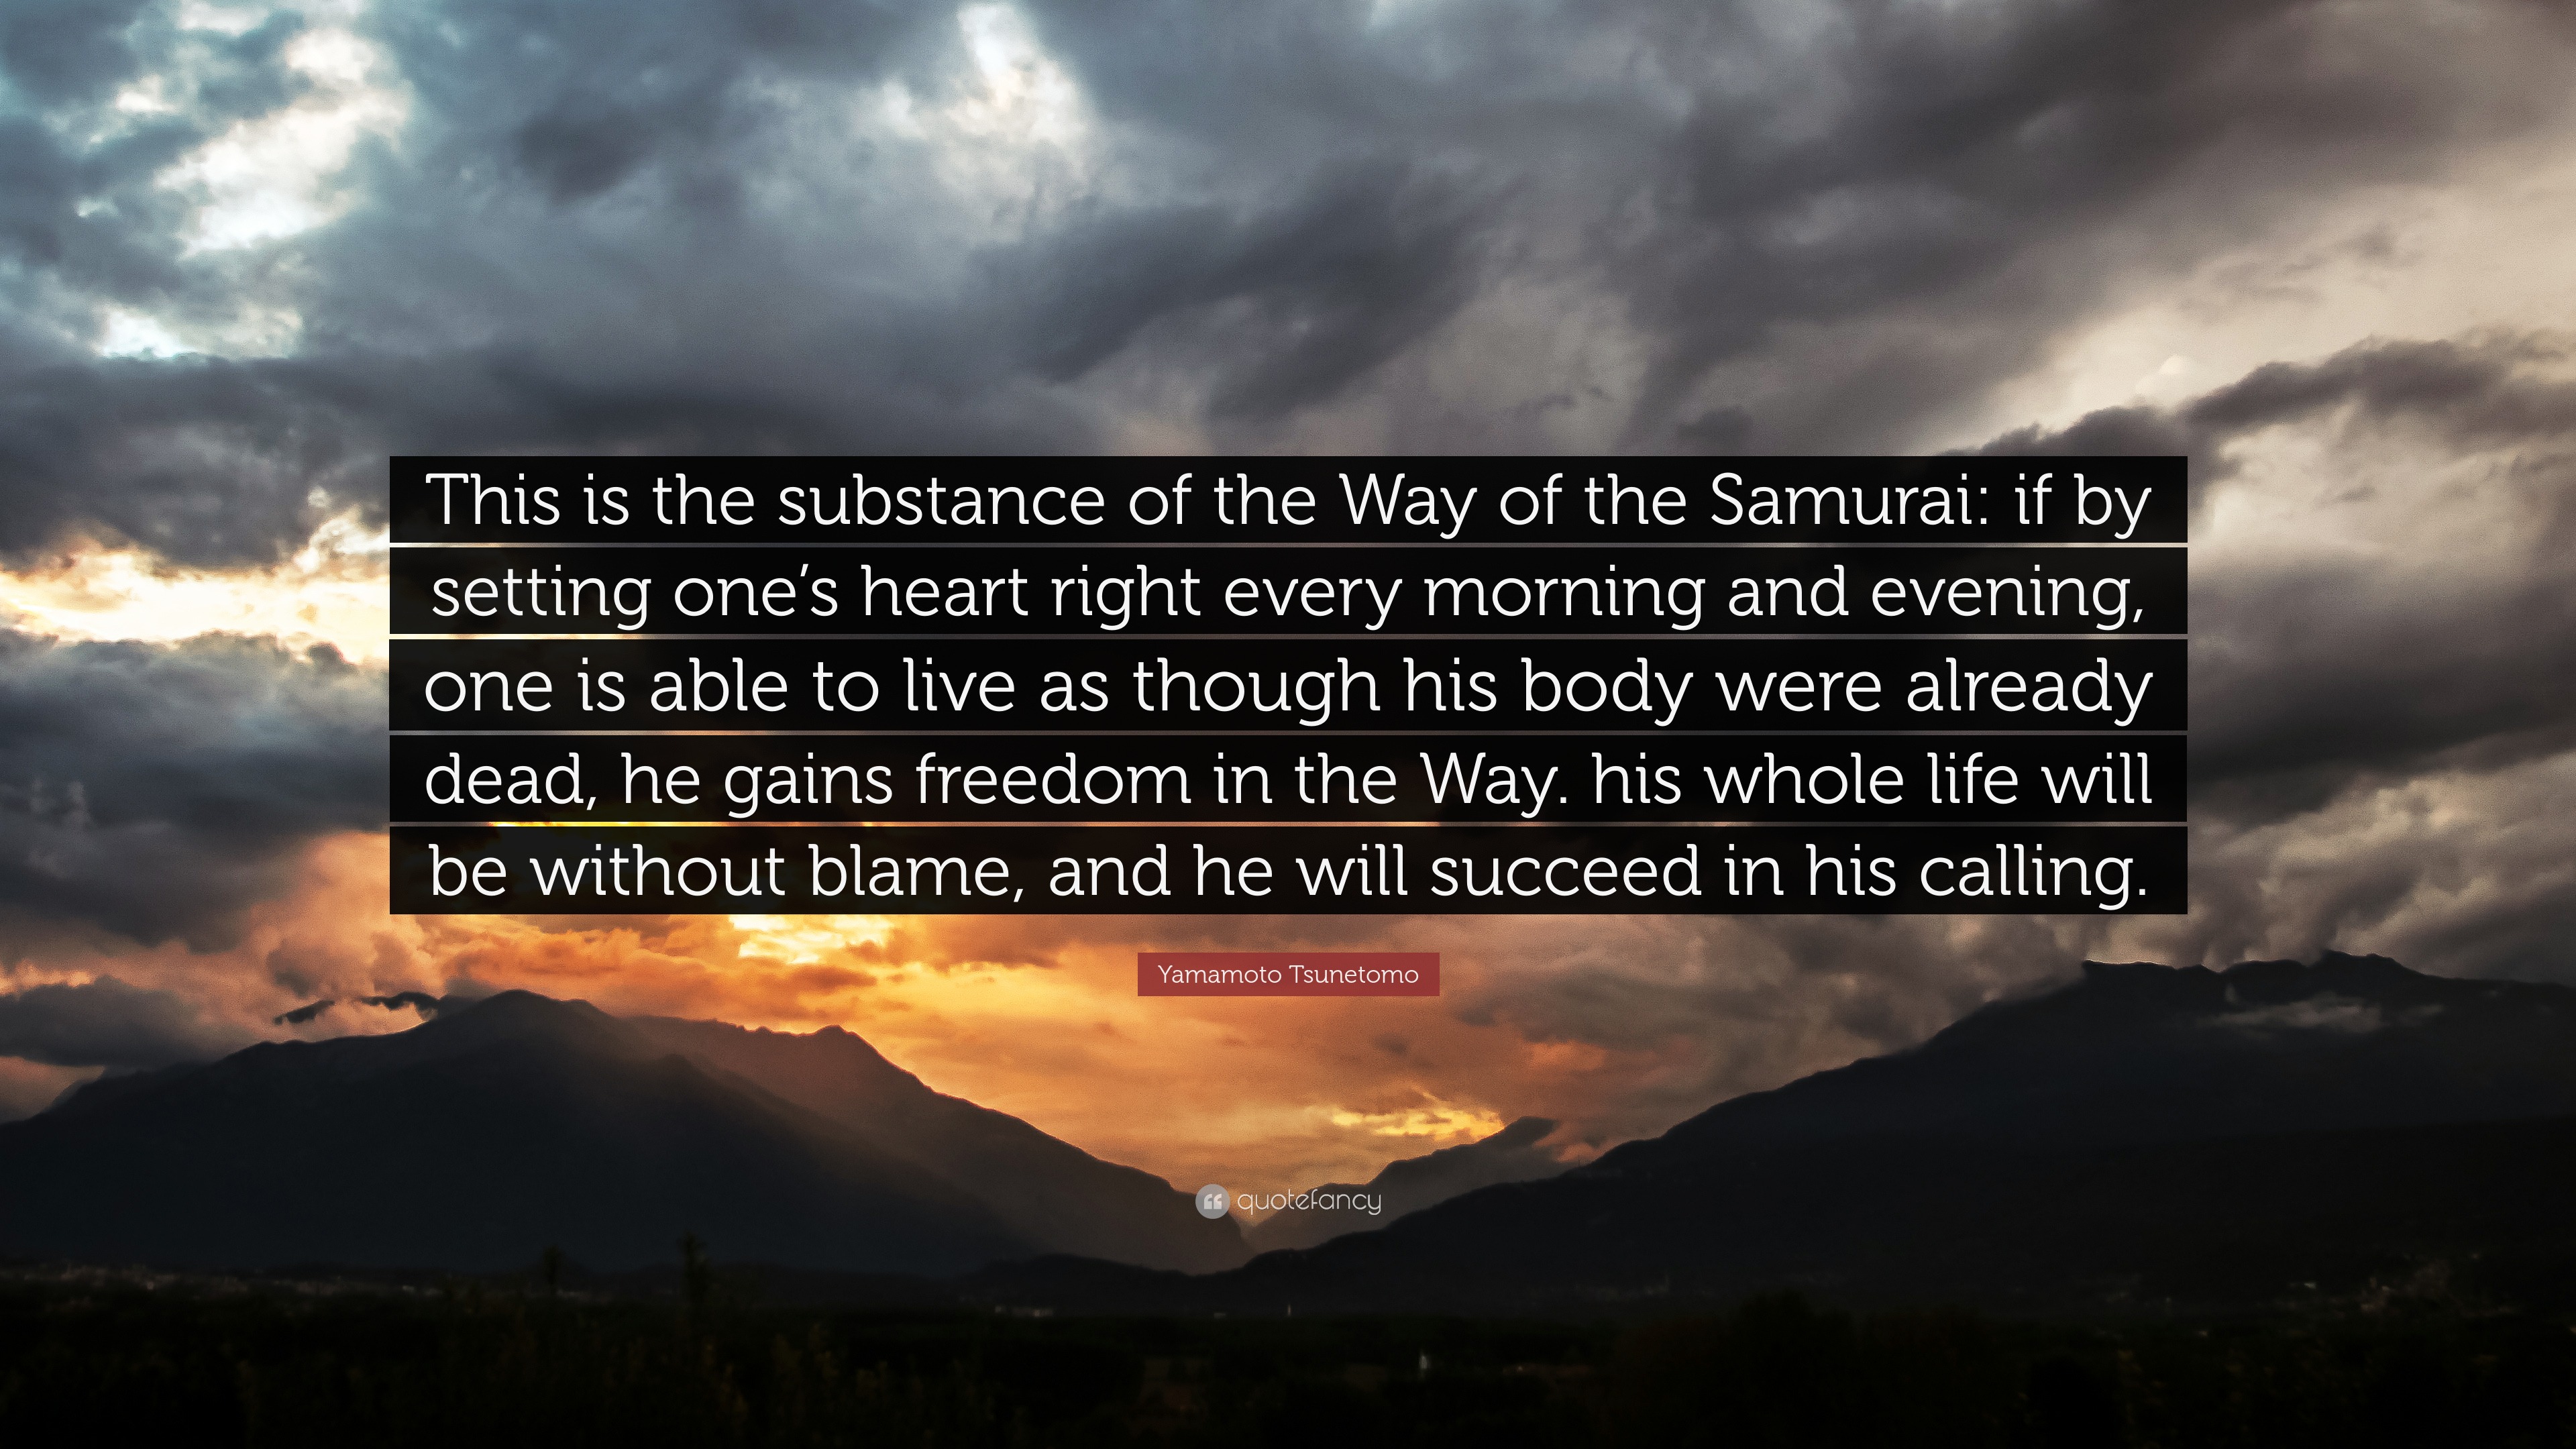 Yamamoto Tsunetomo Quote: “This is the substance of the Way of the 